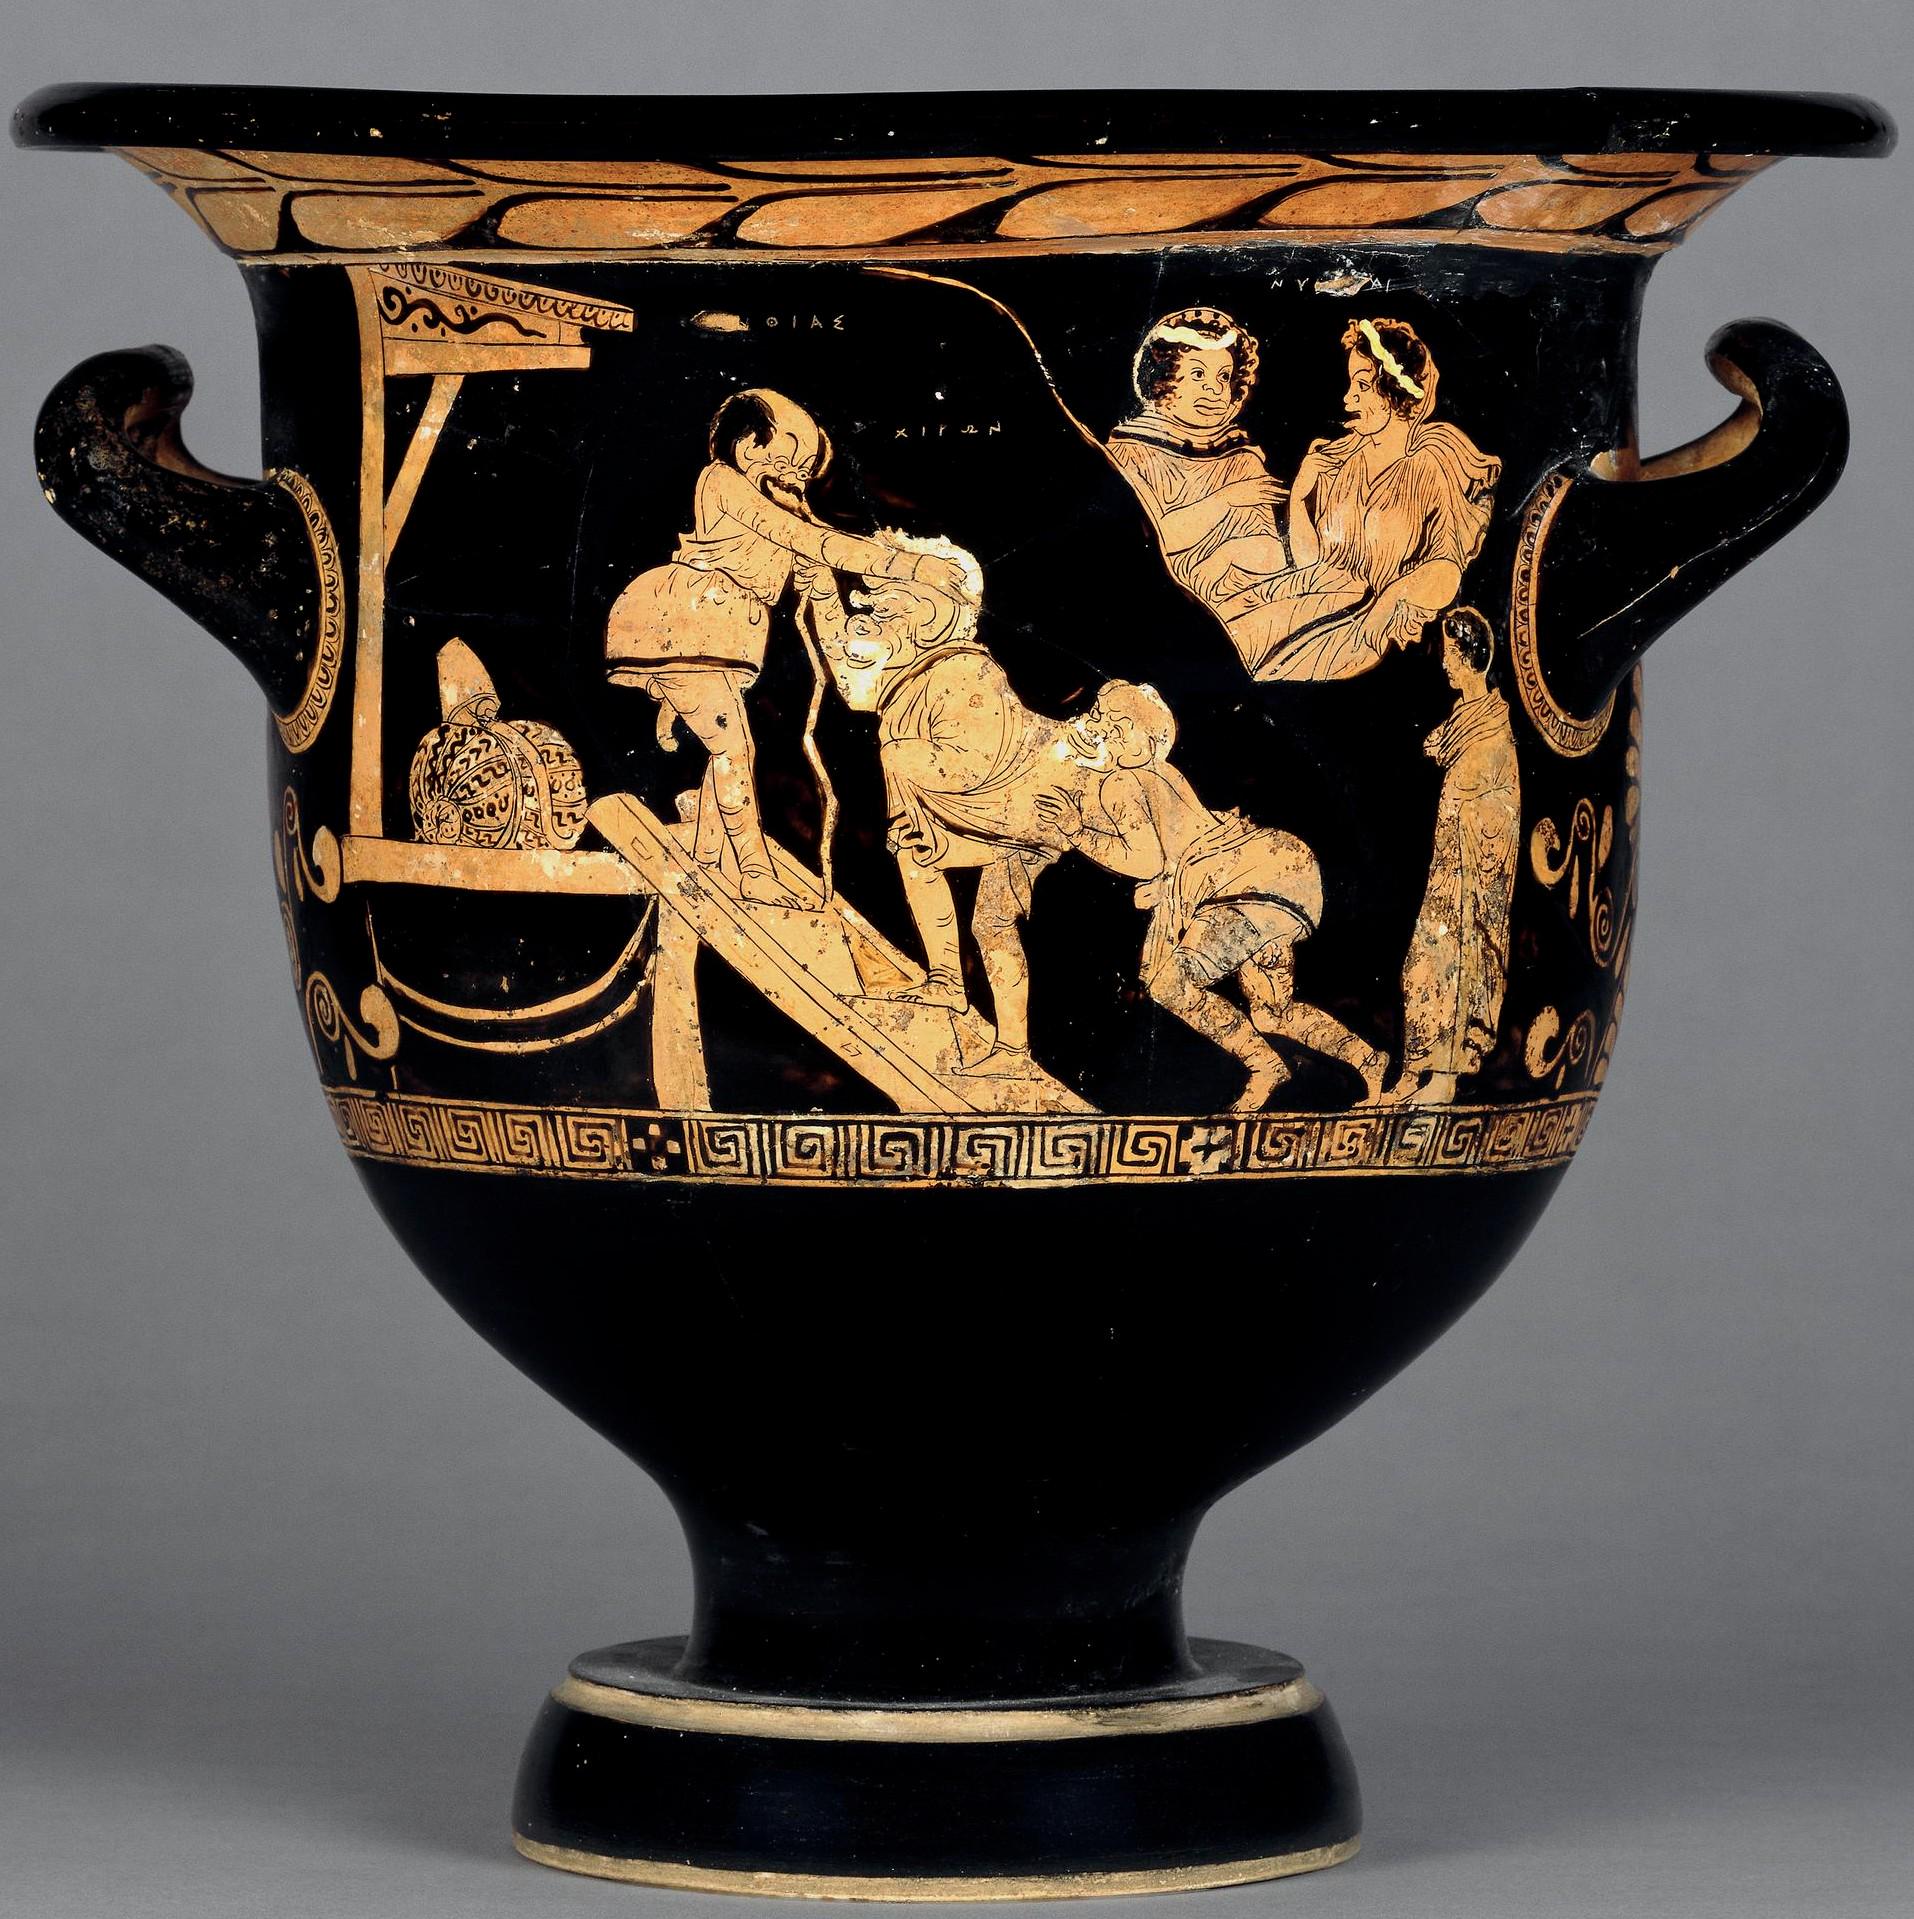 Apulian Greek Bell Krater 380-370 BCE, depicting a comedy-parody of an ancient myth.jpeg